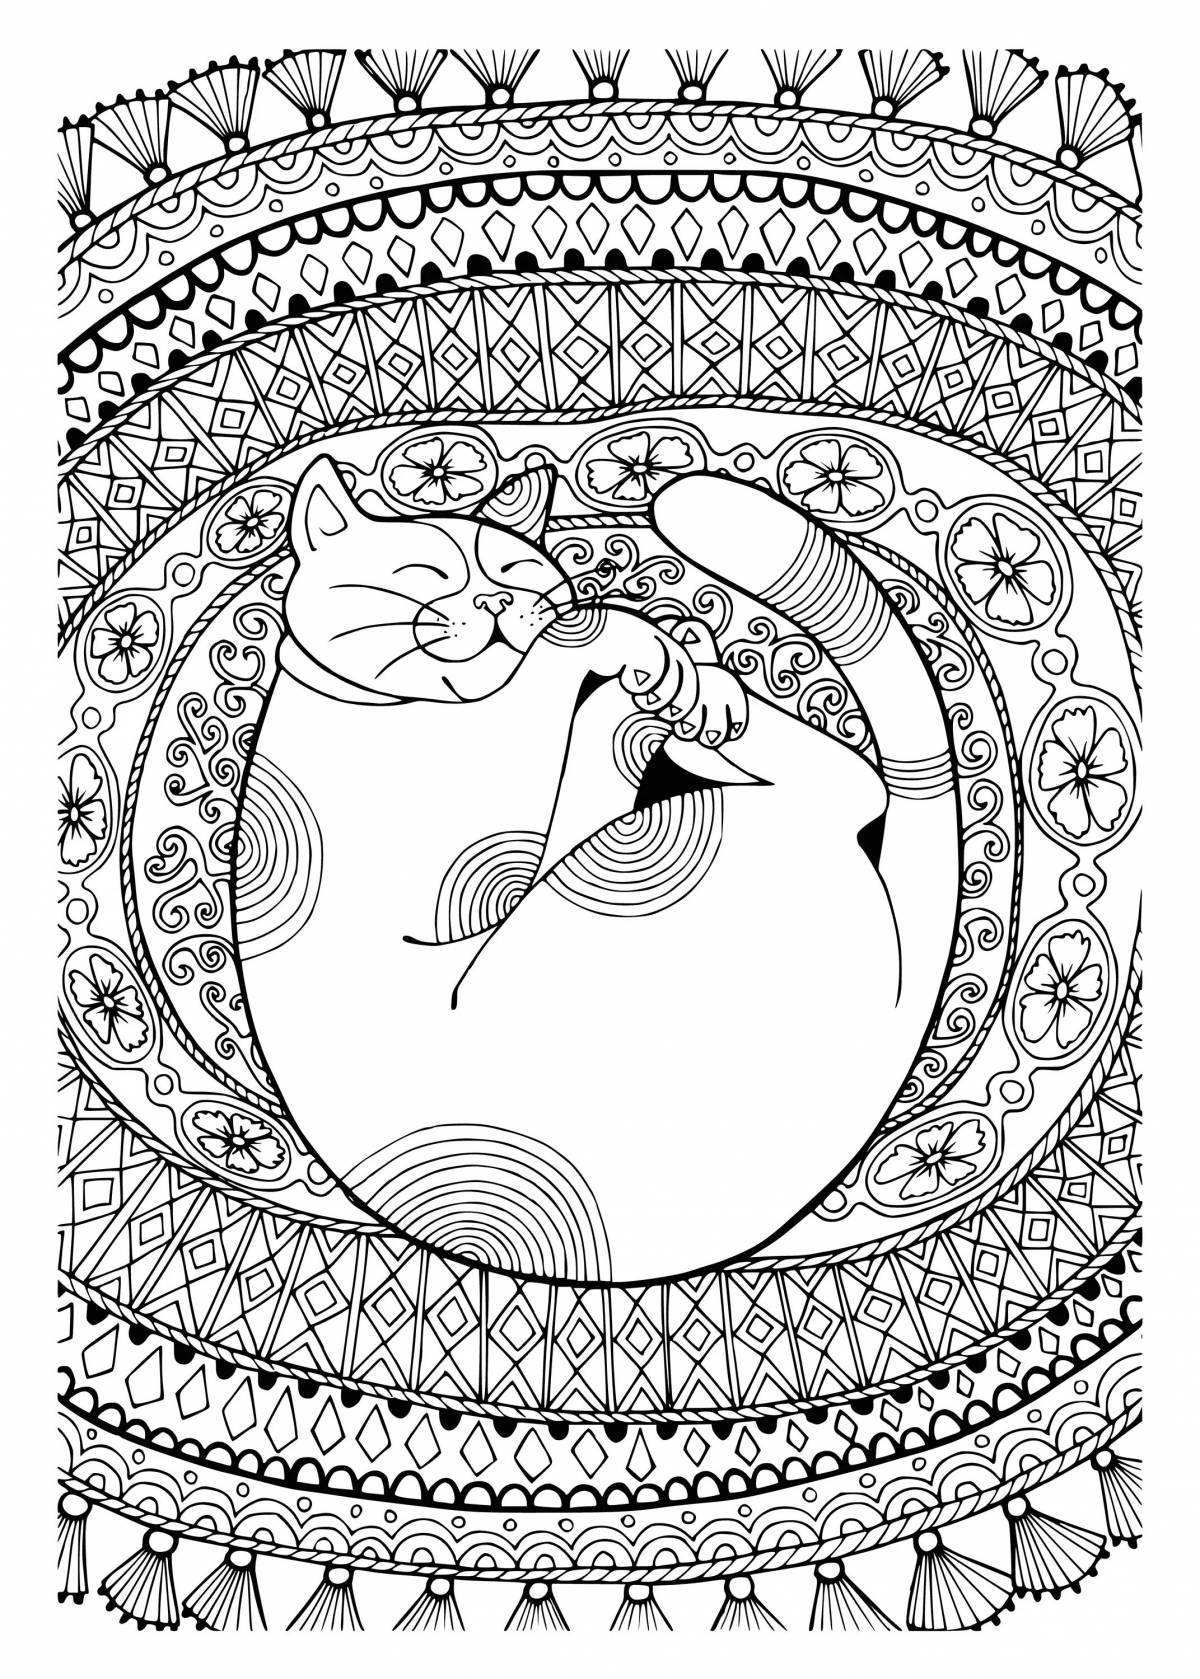 Dreamy meditative coloring book for adults